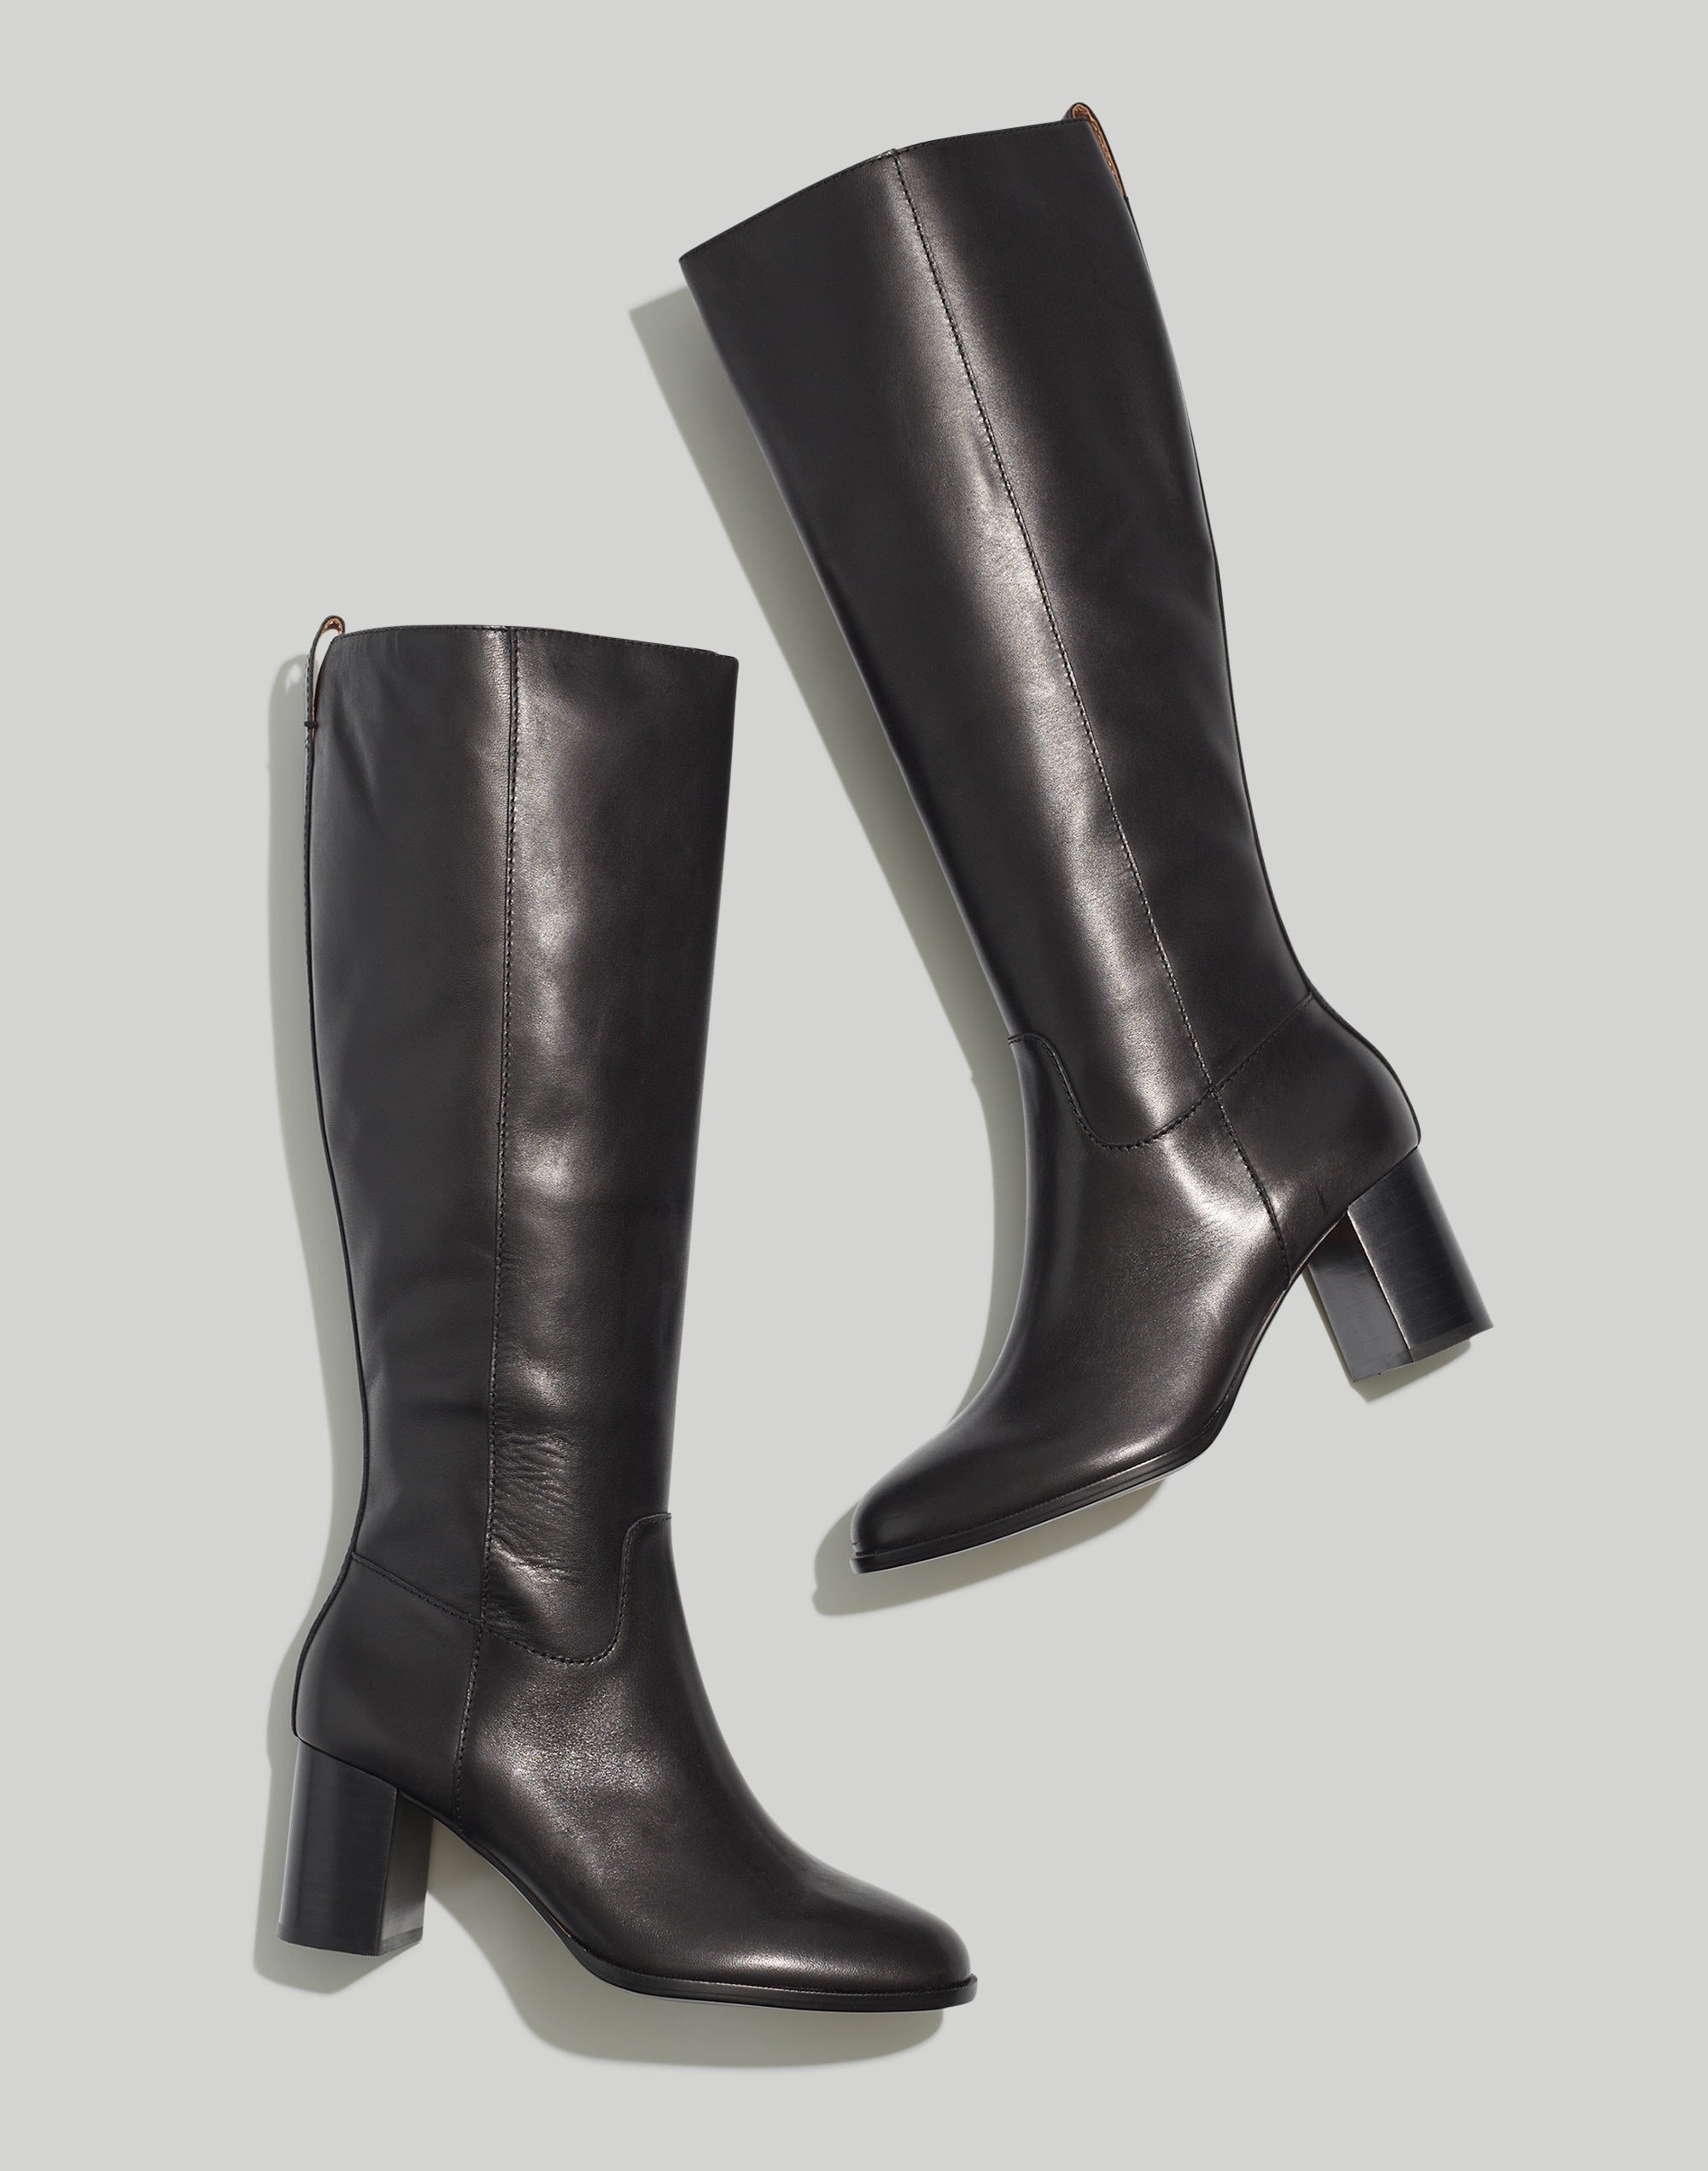 The Selina Tall Boot with Extended Calf